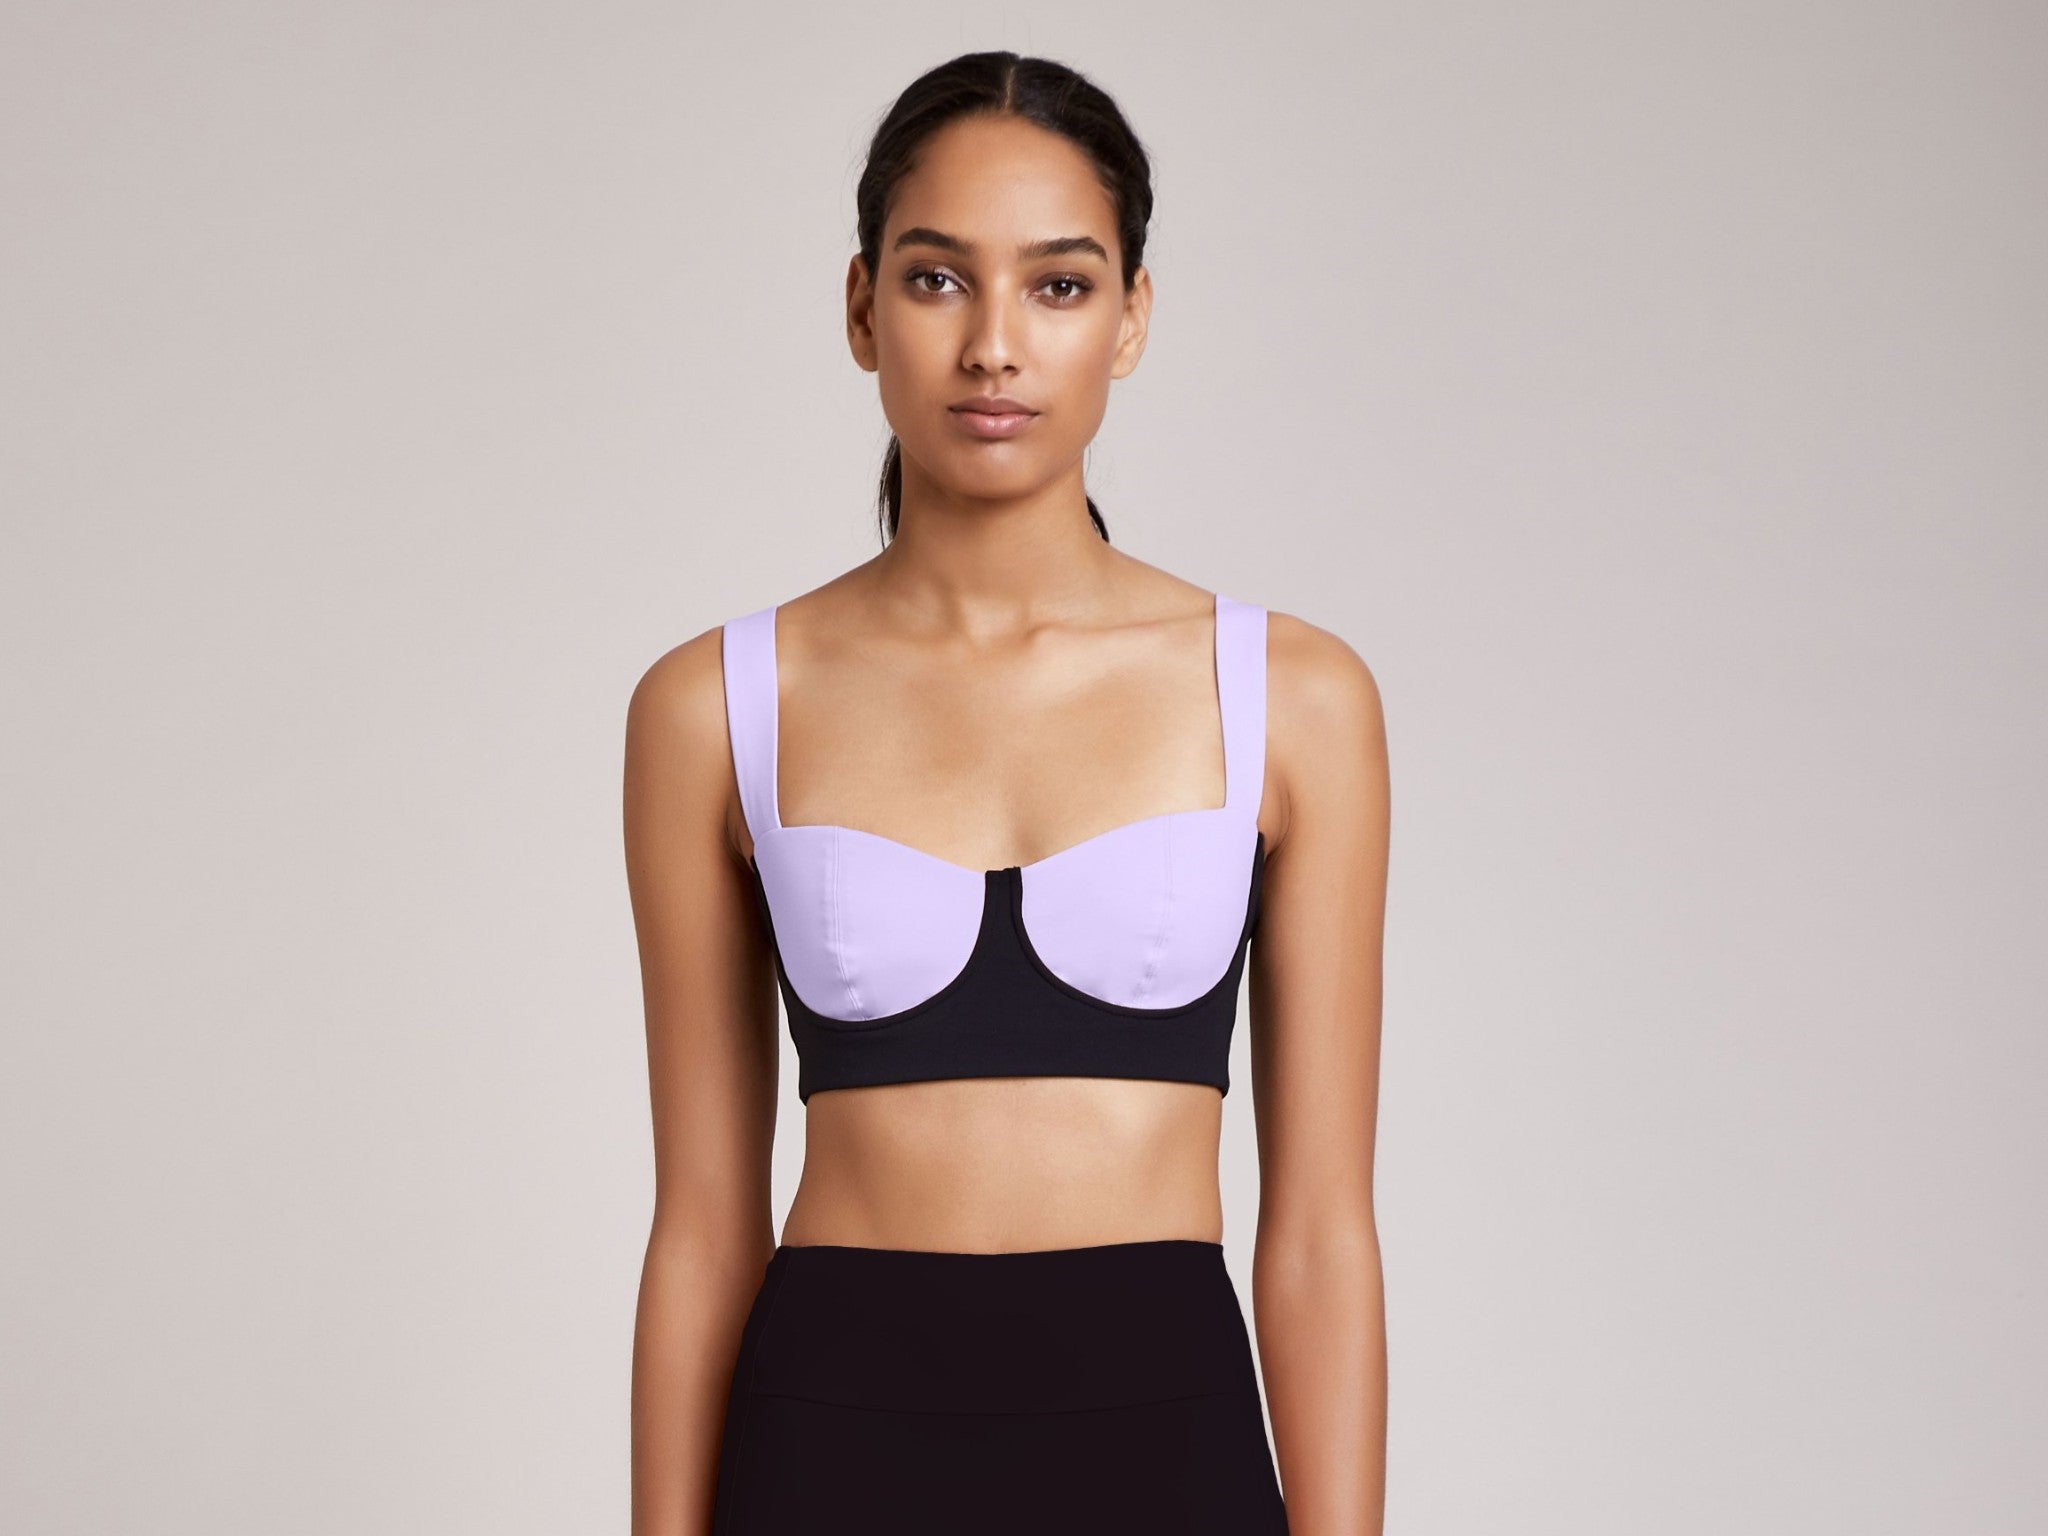 Tesco F&F launches stylish and affordable activewear that won't